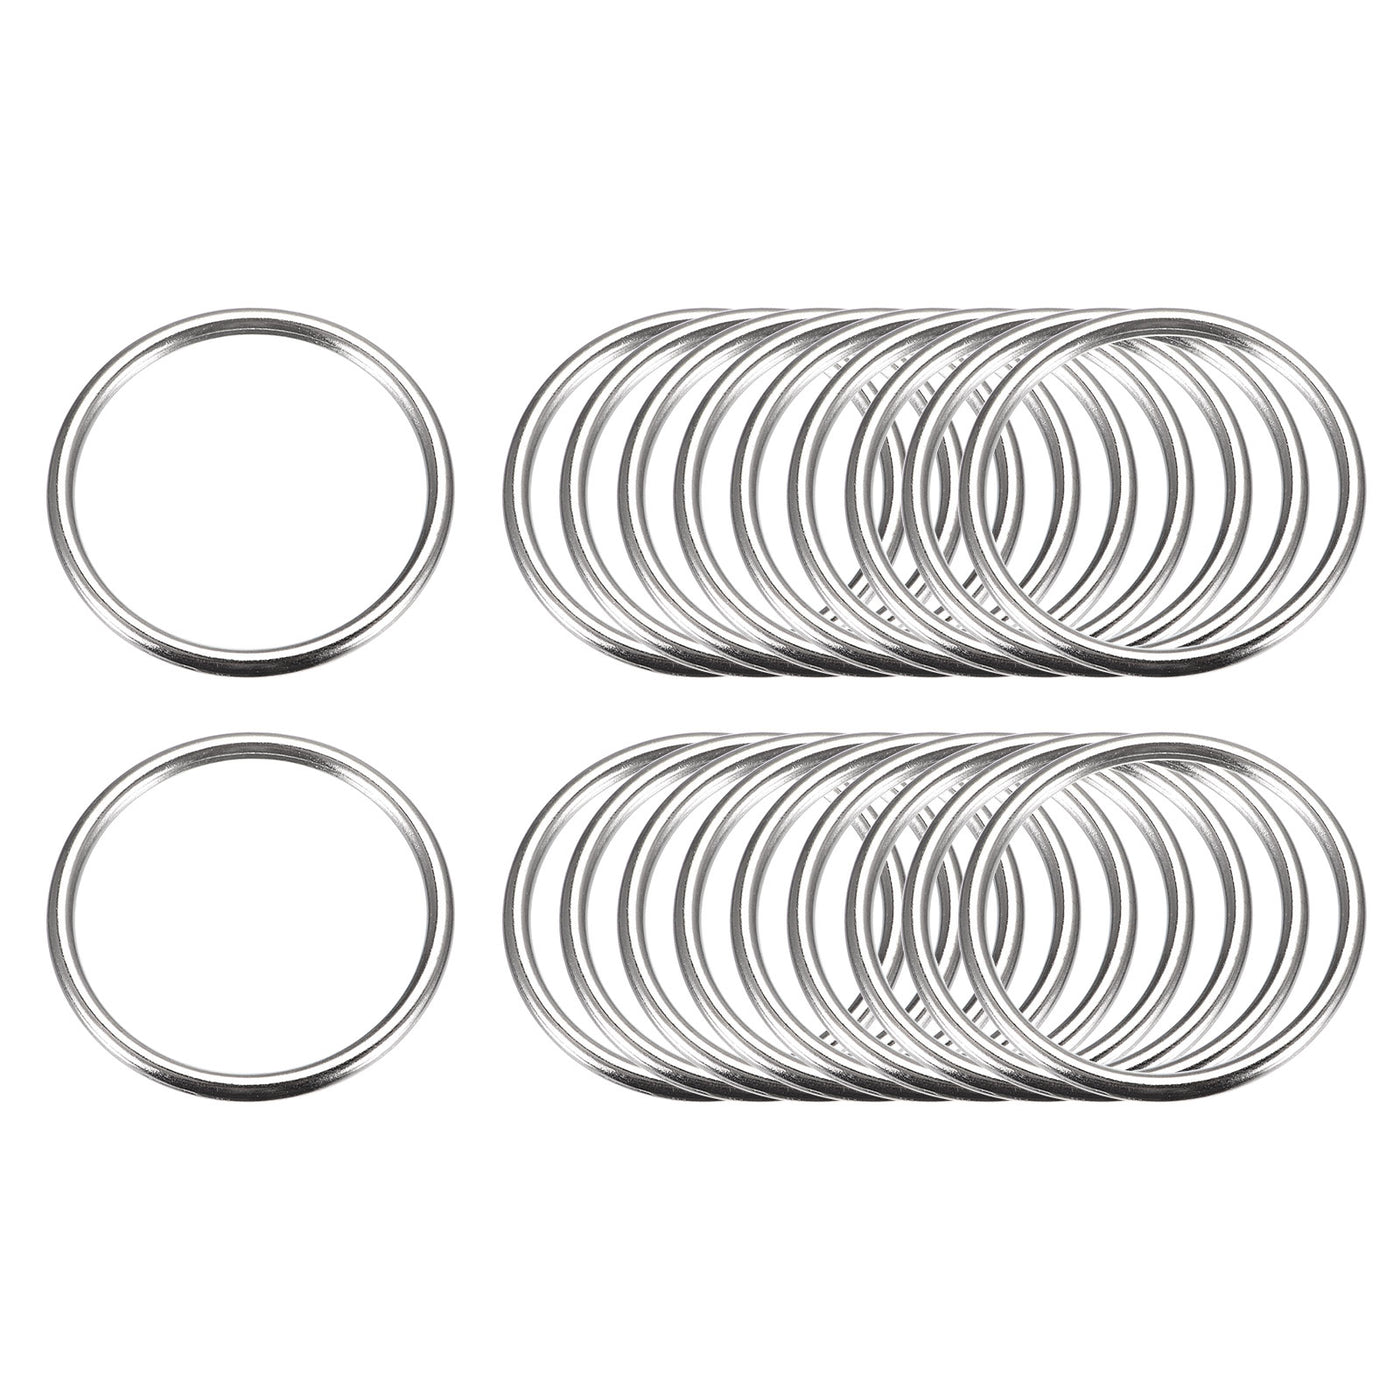 uxcell Uxcell Metal O Rings, 20pcs 35mm(1.38") ID 3mm Thick Welded O-Ringe, Silver Tone